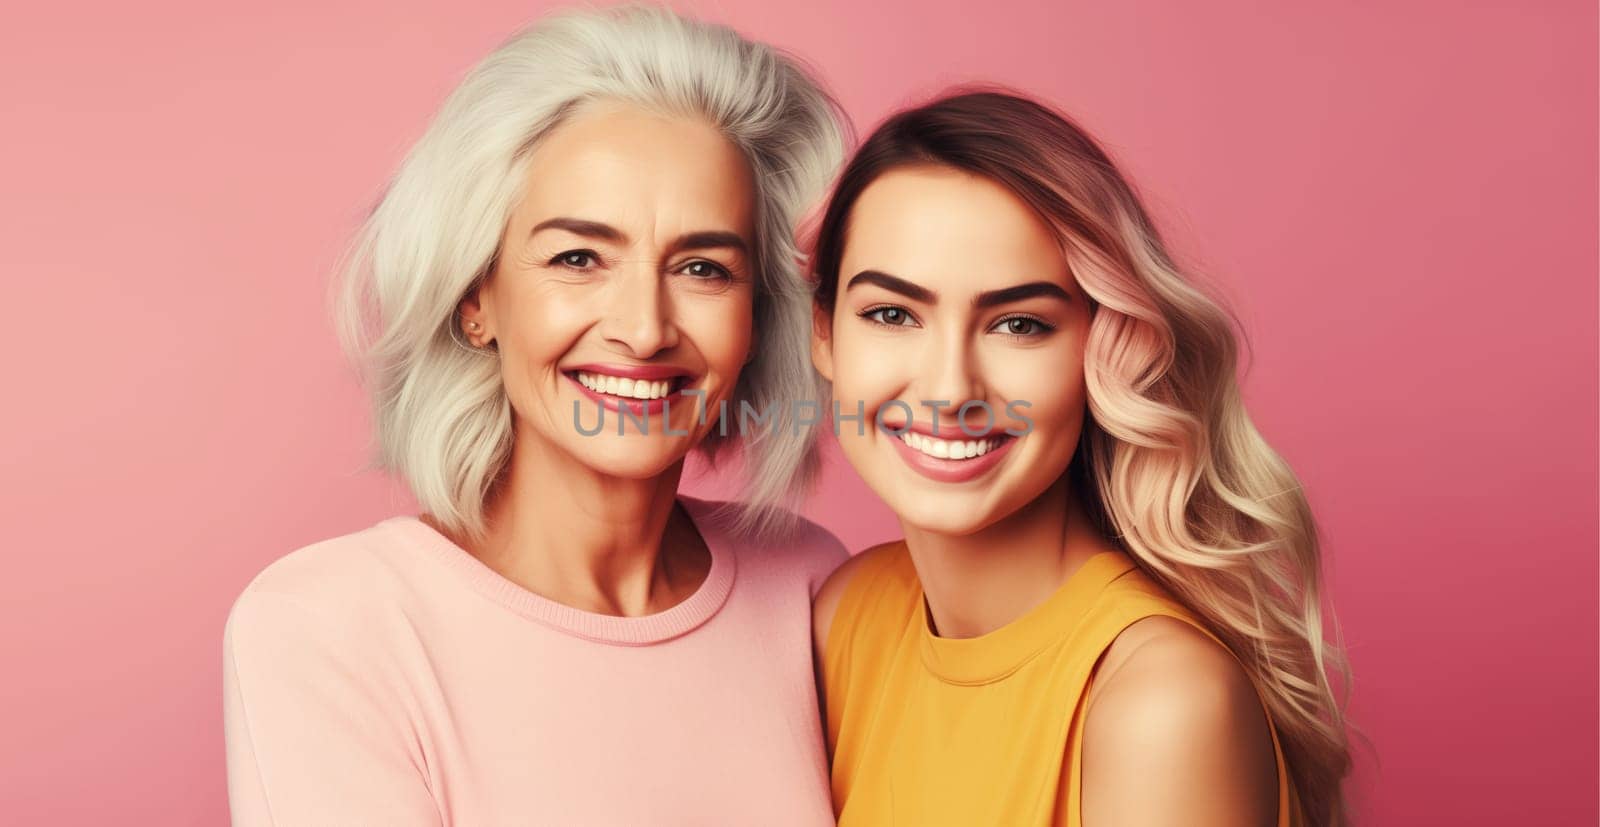 Portrait of happy smiling mature mother and adult daughter, two women together looking at camera on color studio background